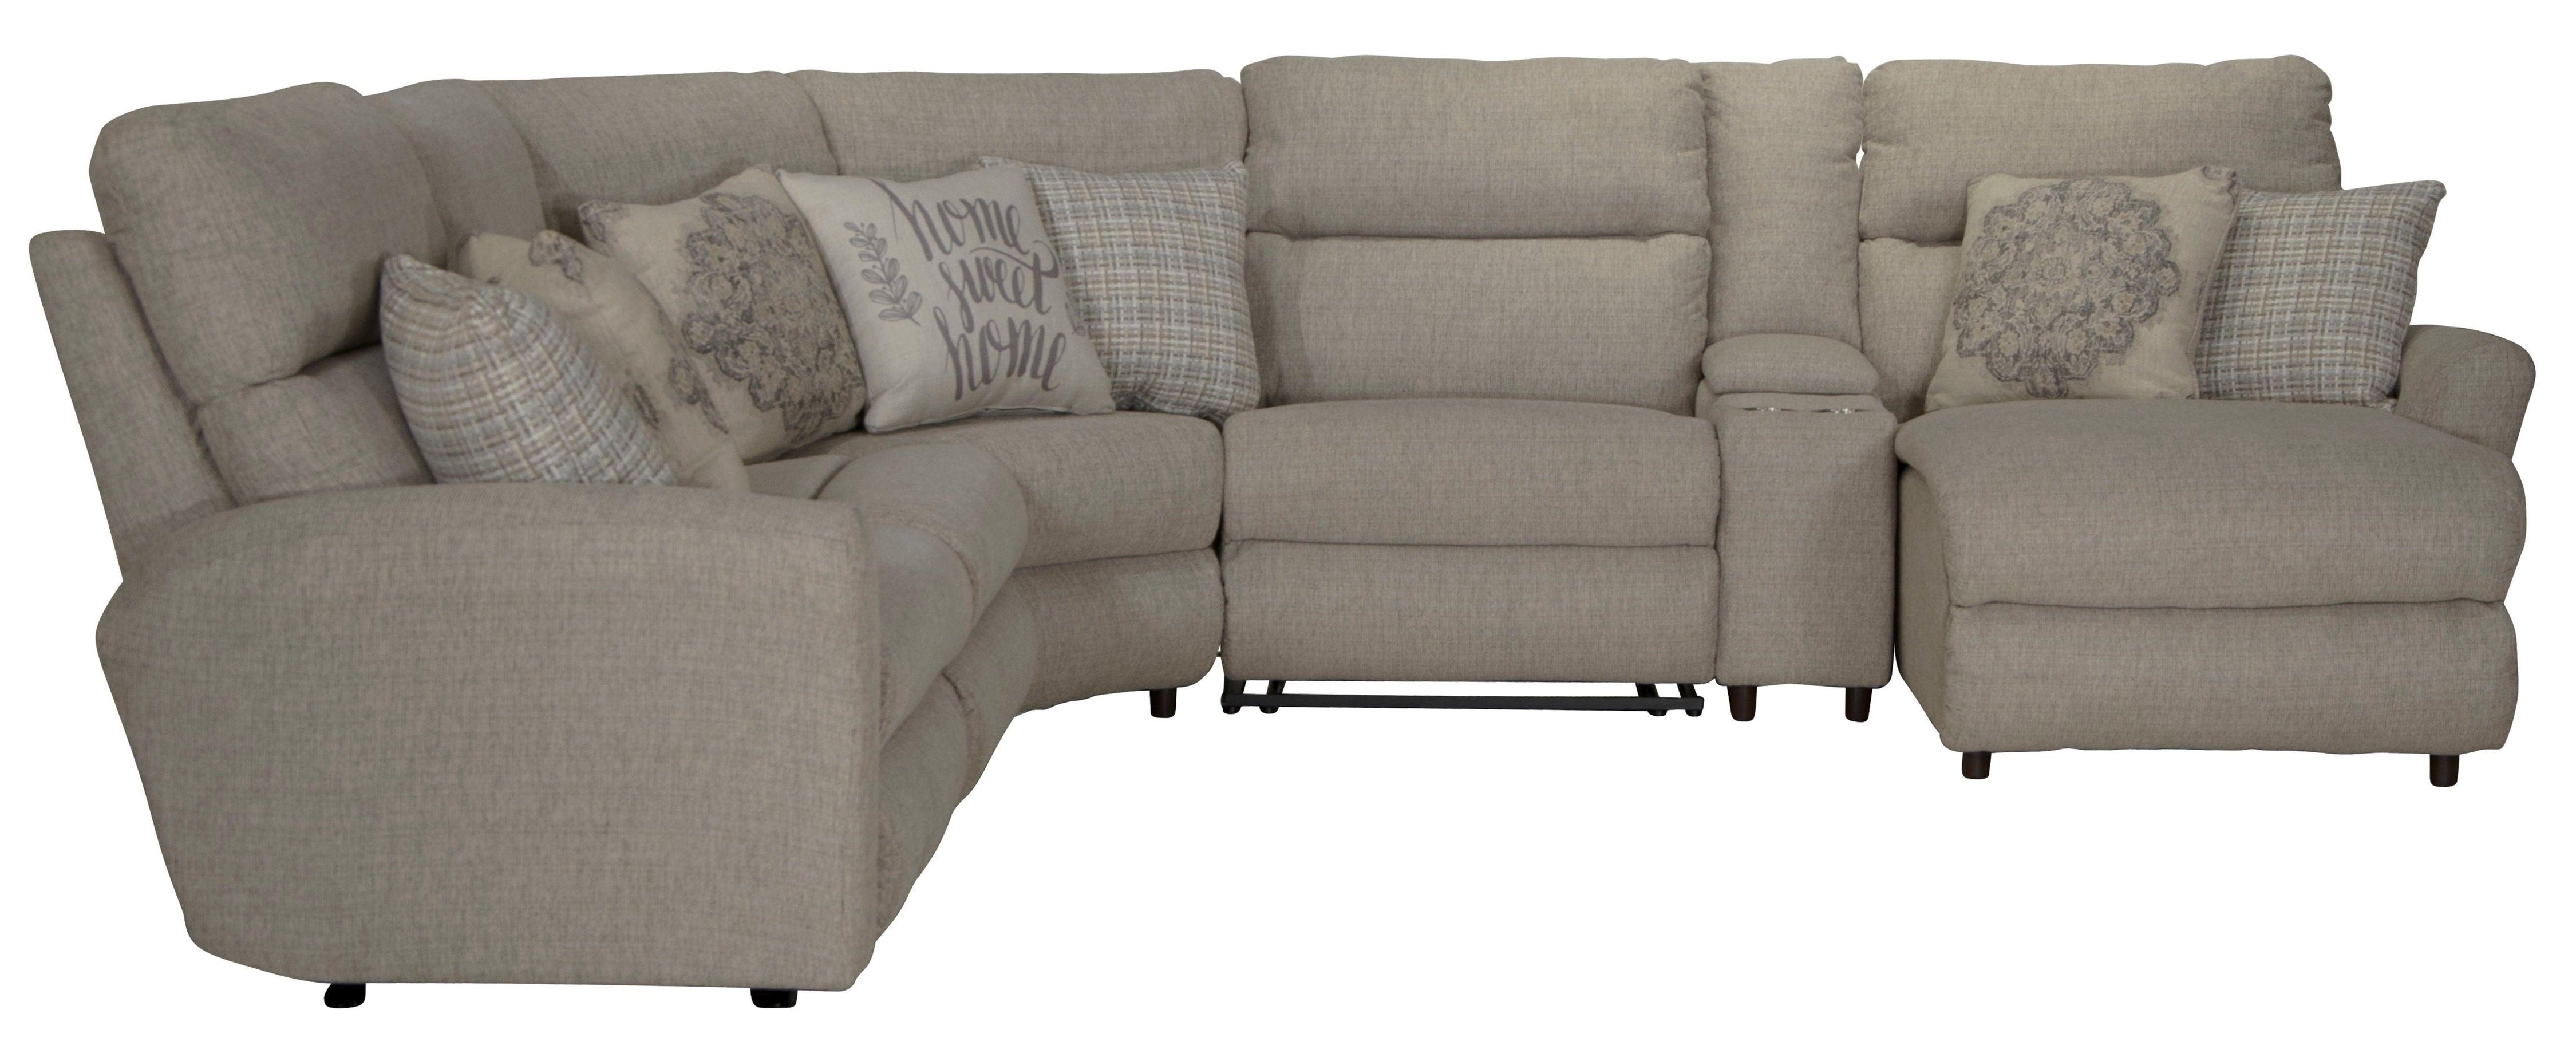 Catnapper - McPherson - Reclining Sectional - 5th Avenue Furniture